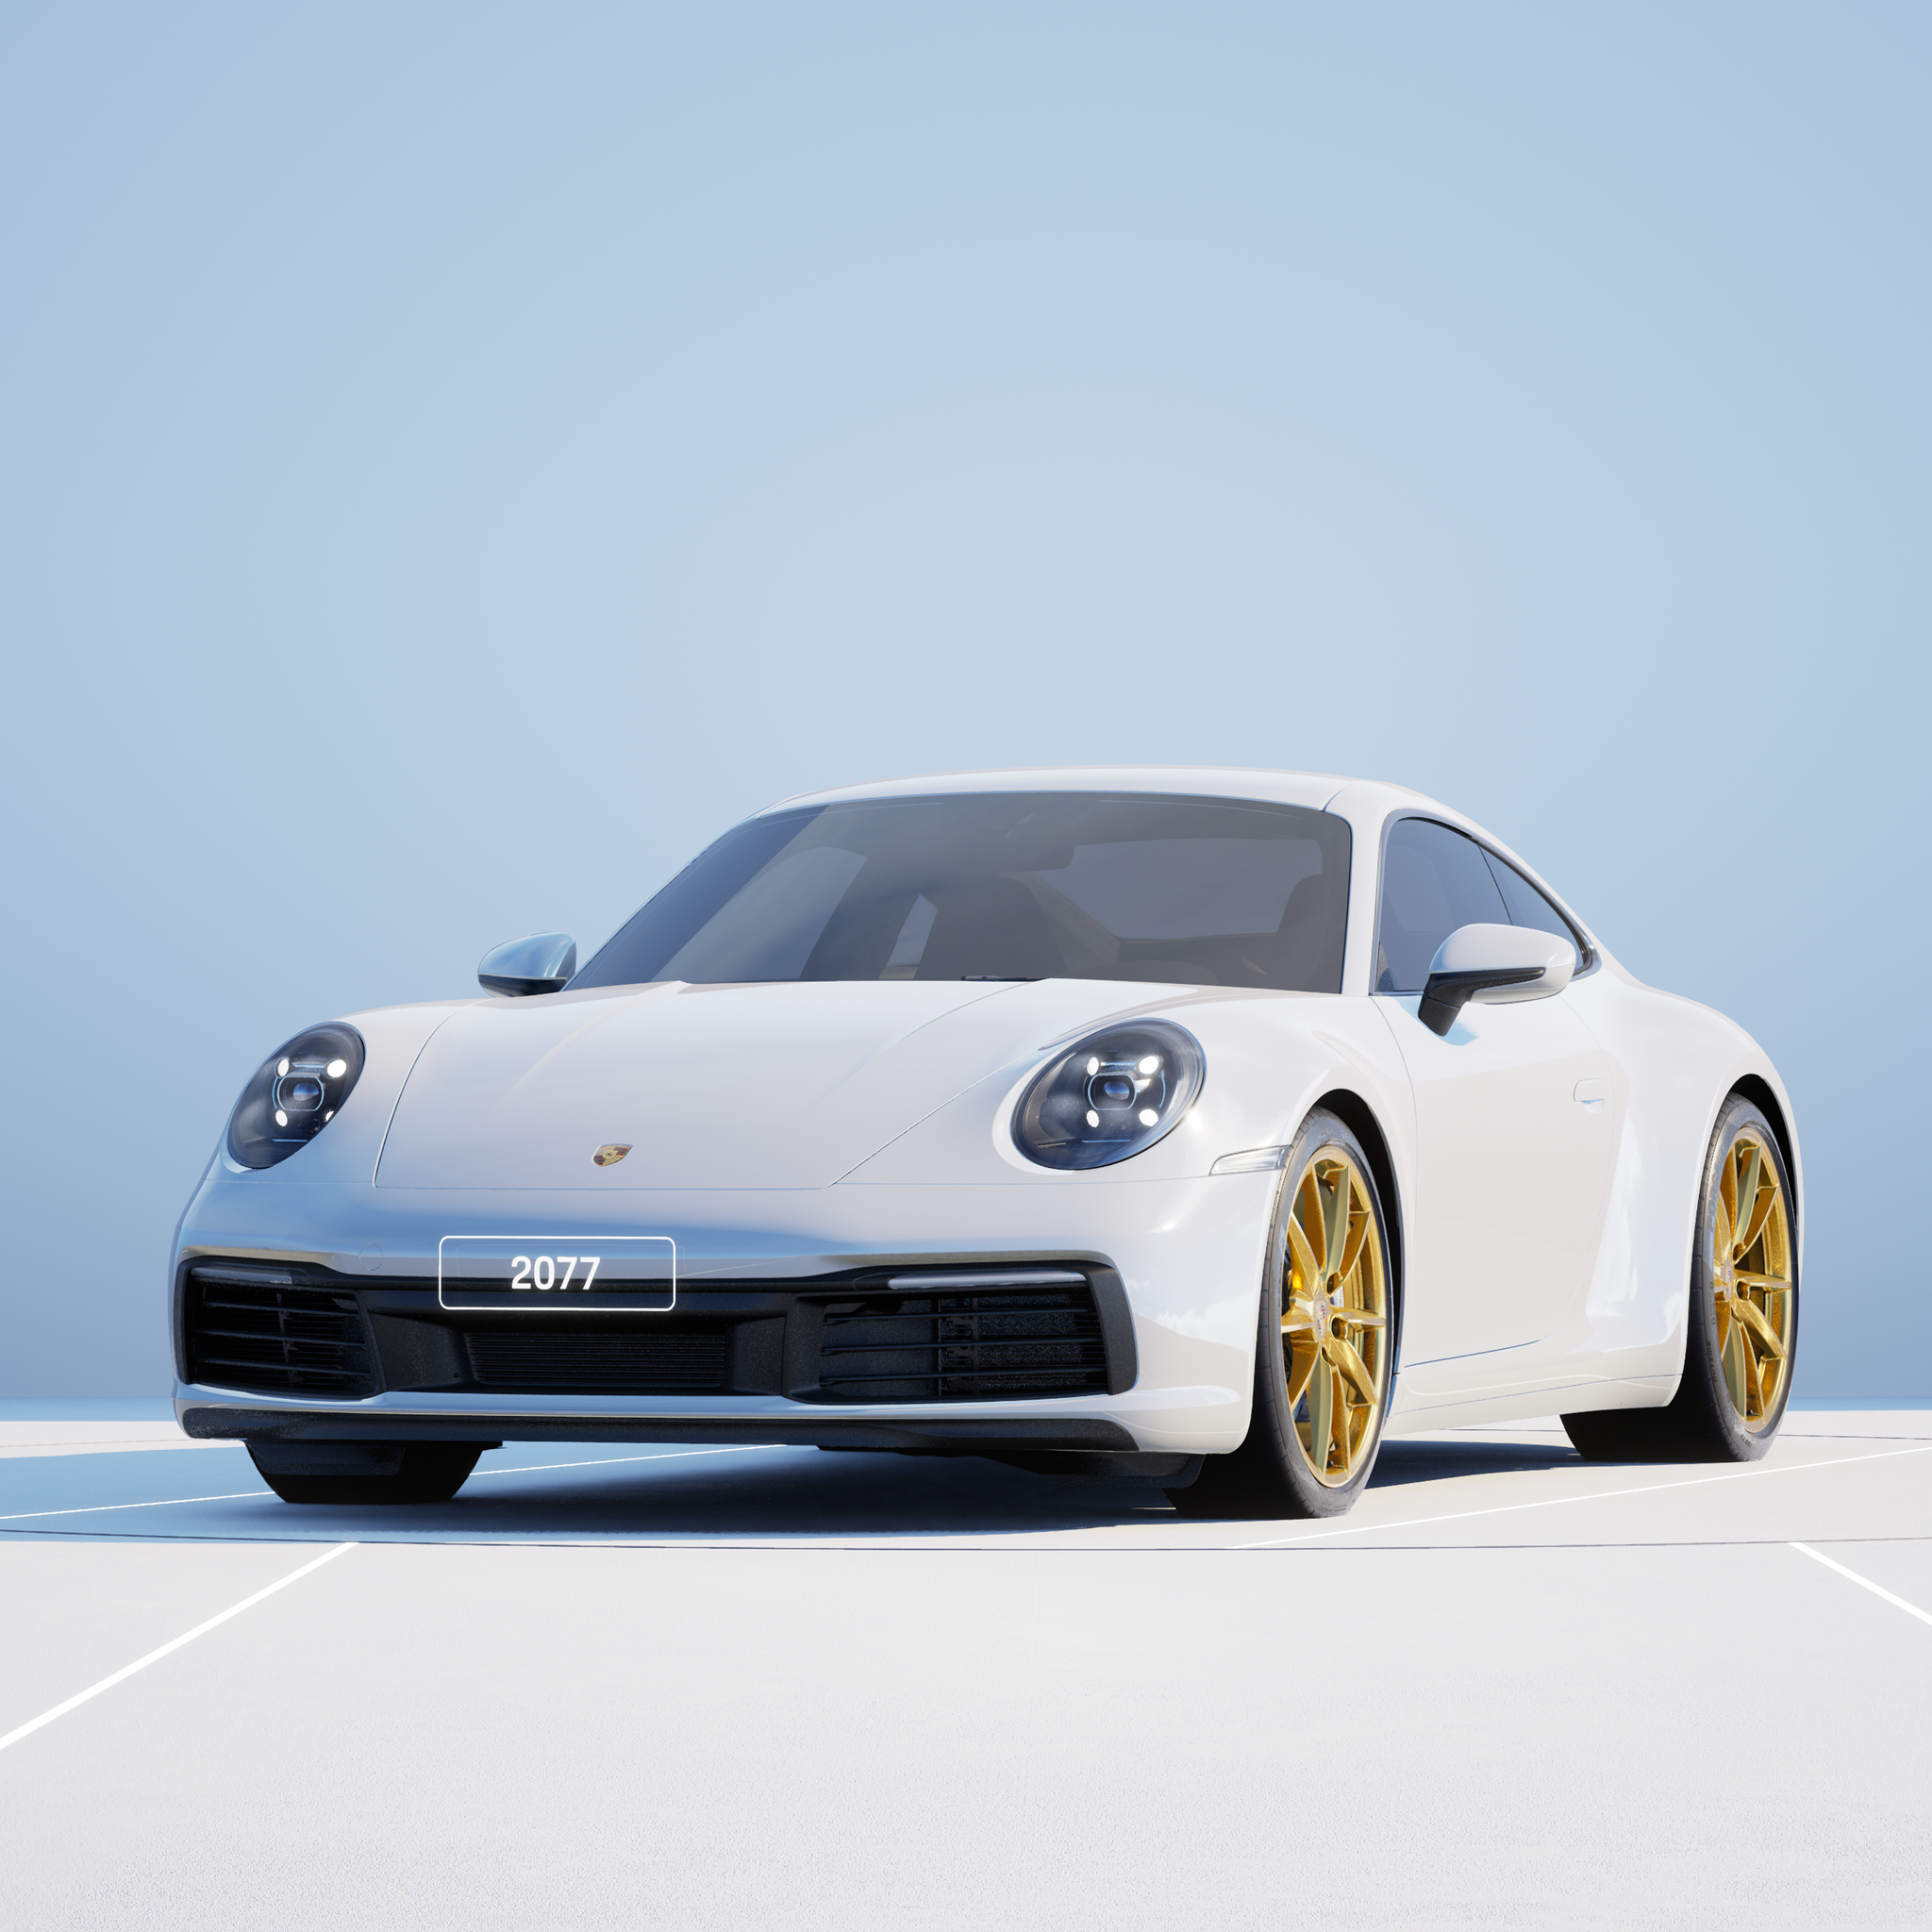 The PORSCHΞ 911 2077 image in phase